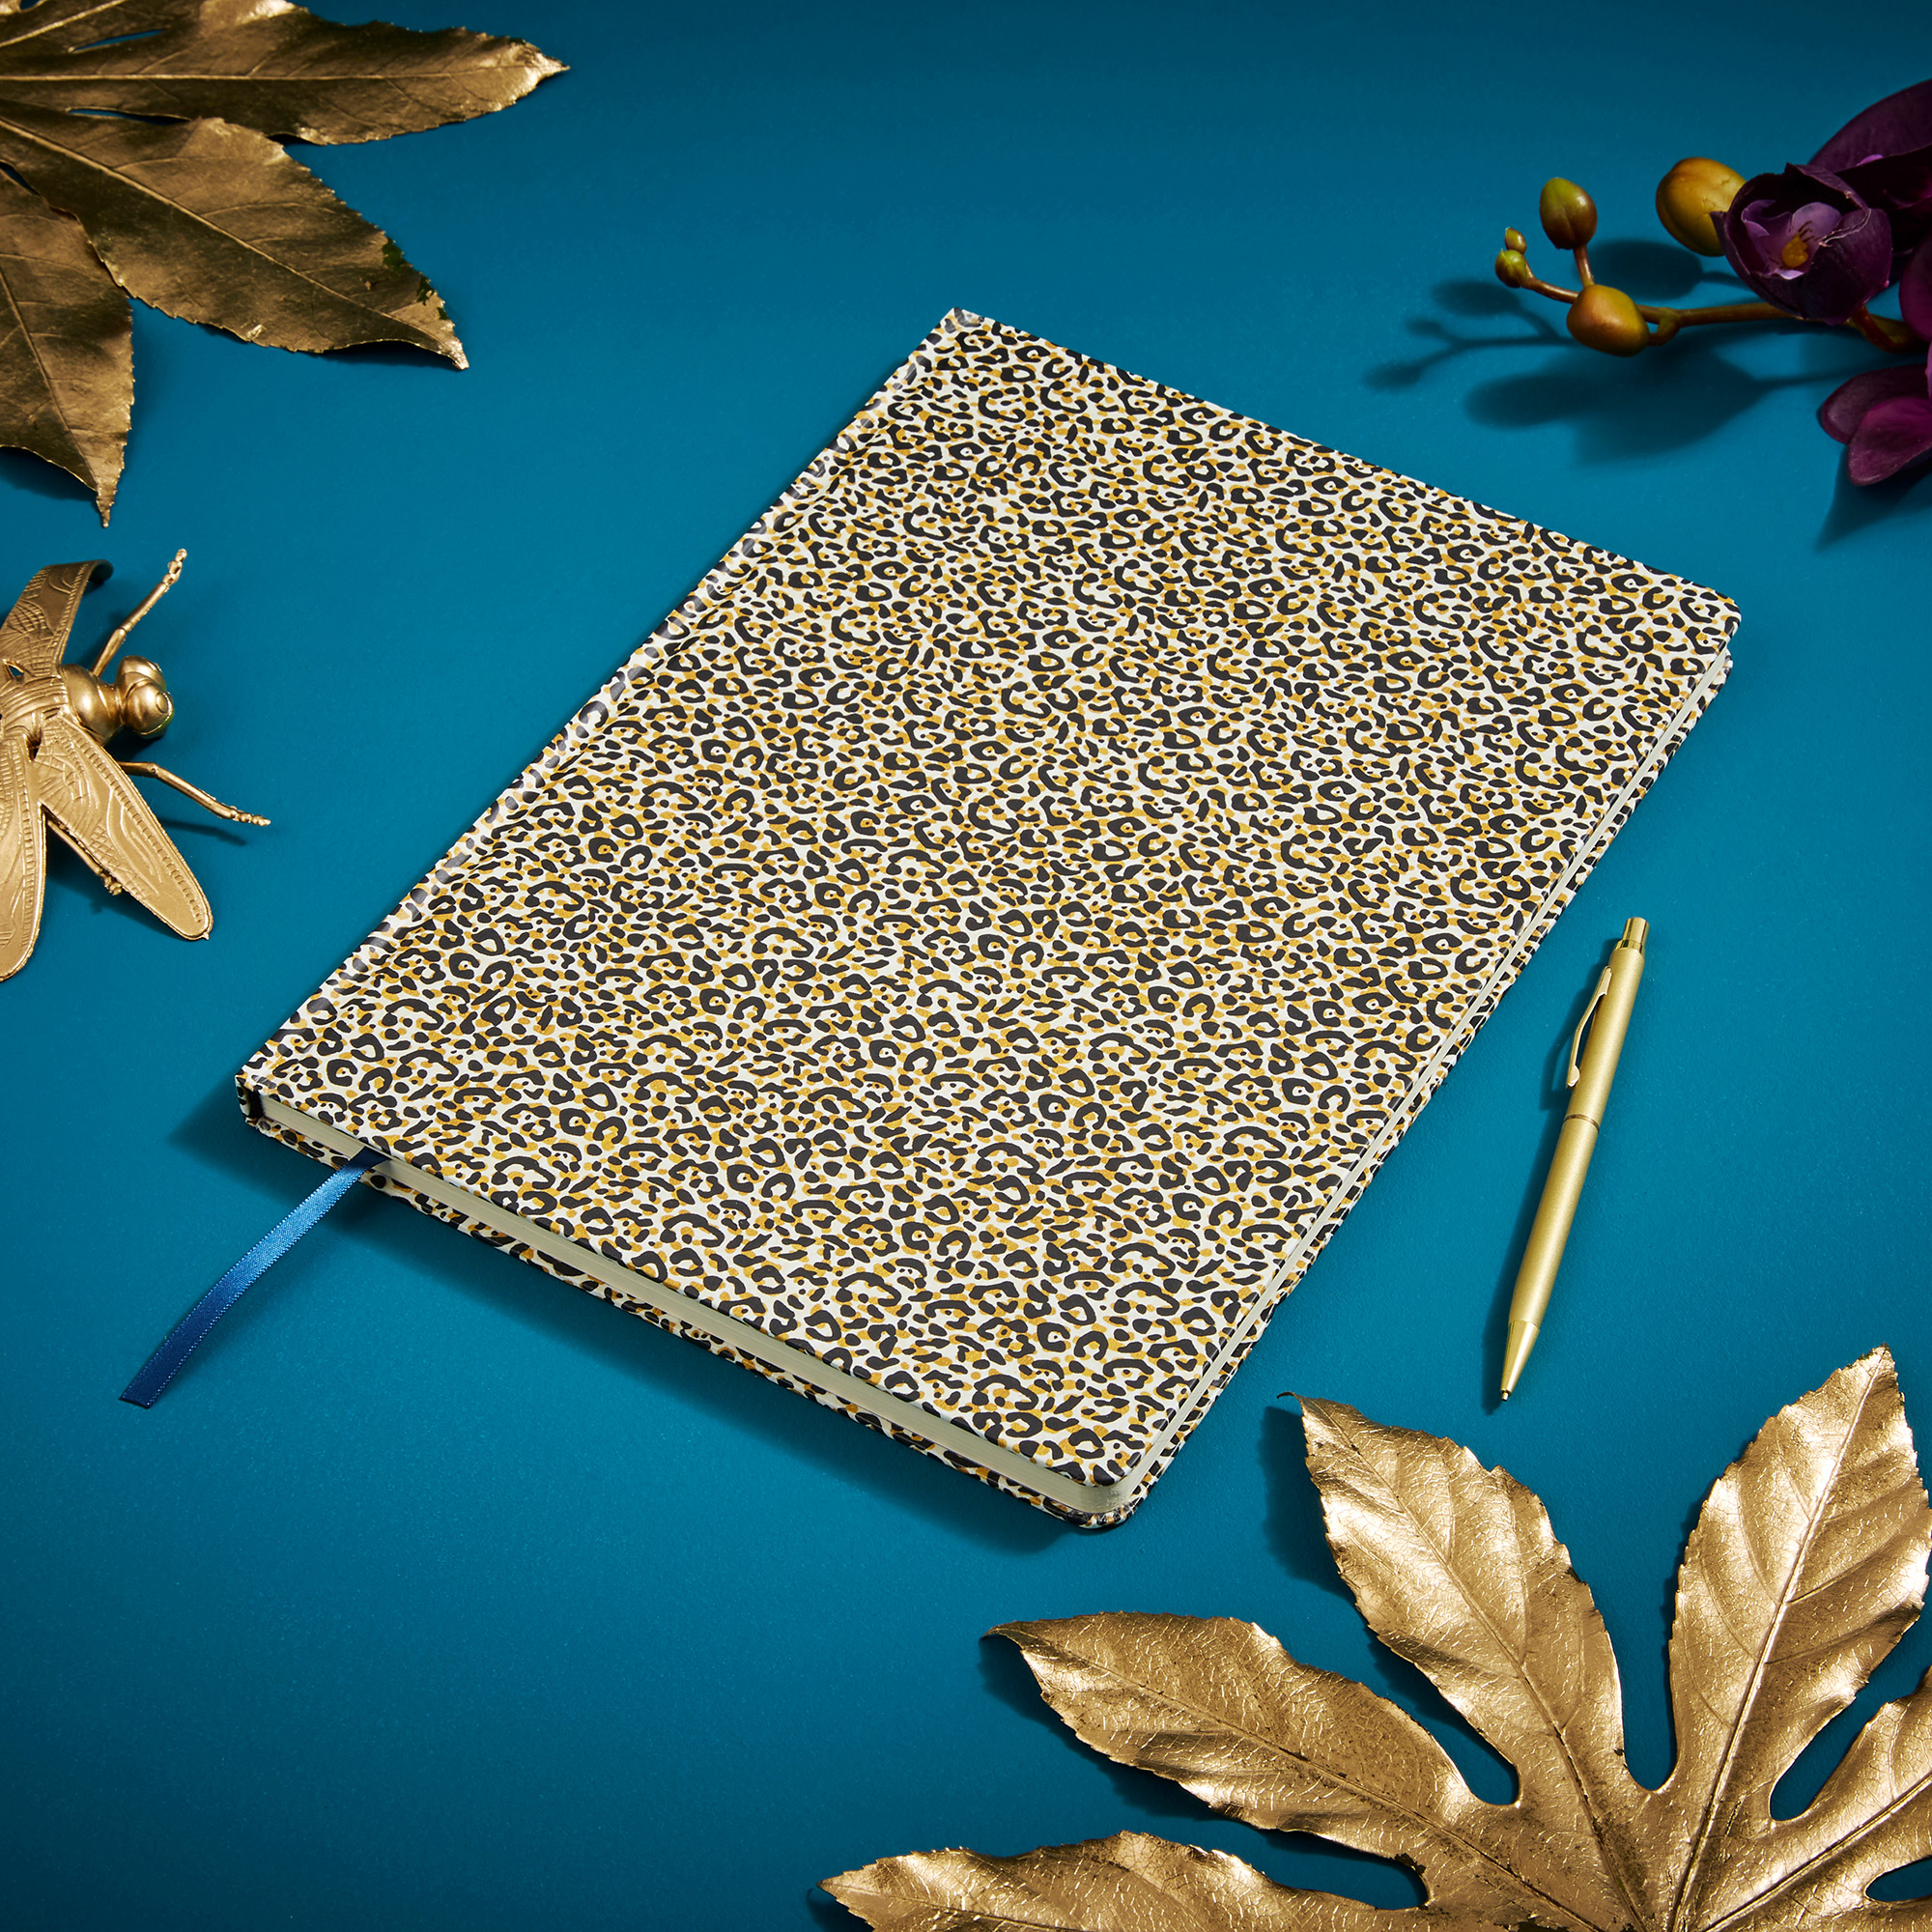 Creatures of Curiosity Leopard Notebook (8.3" x 11.7") image number null